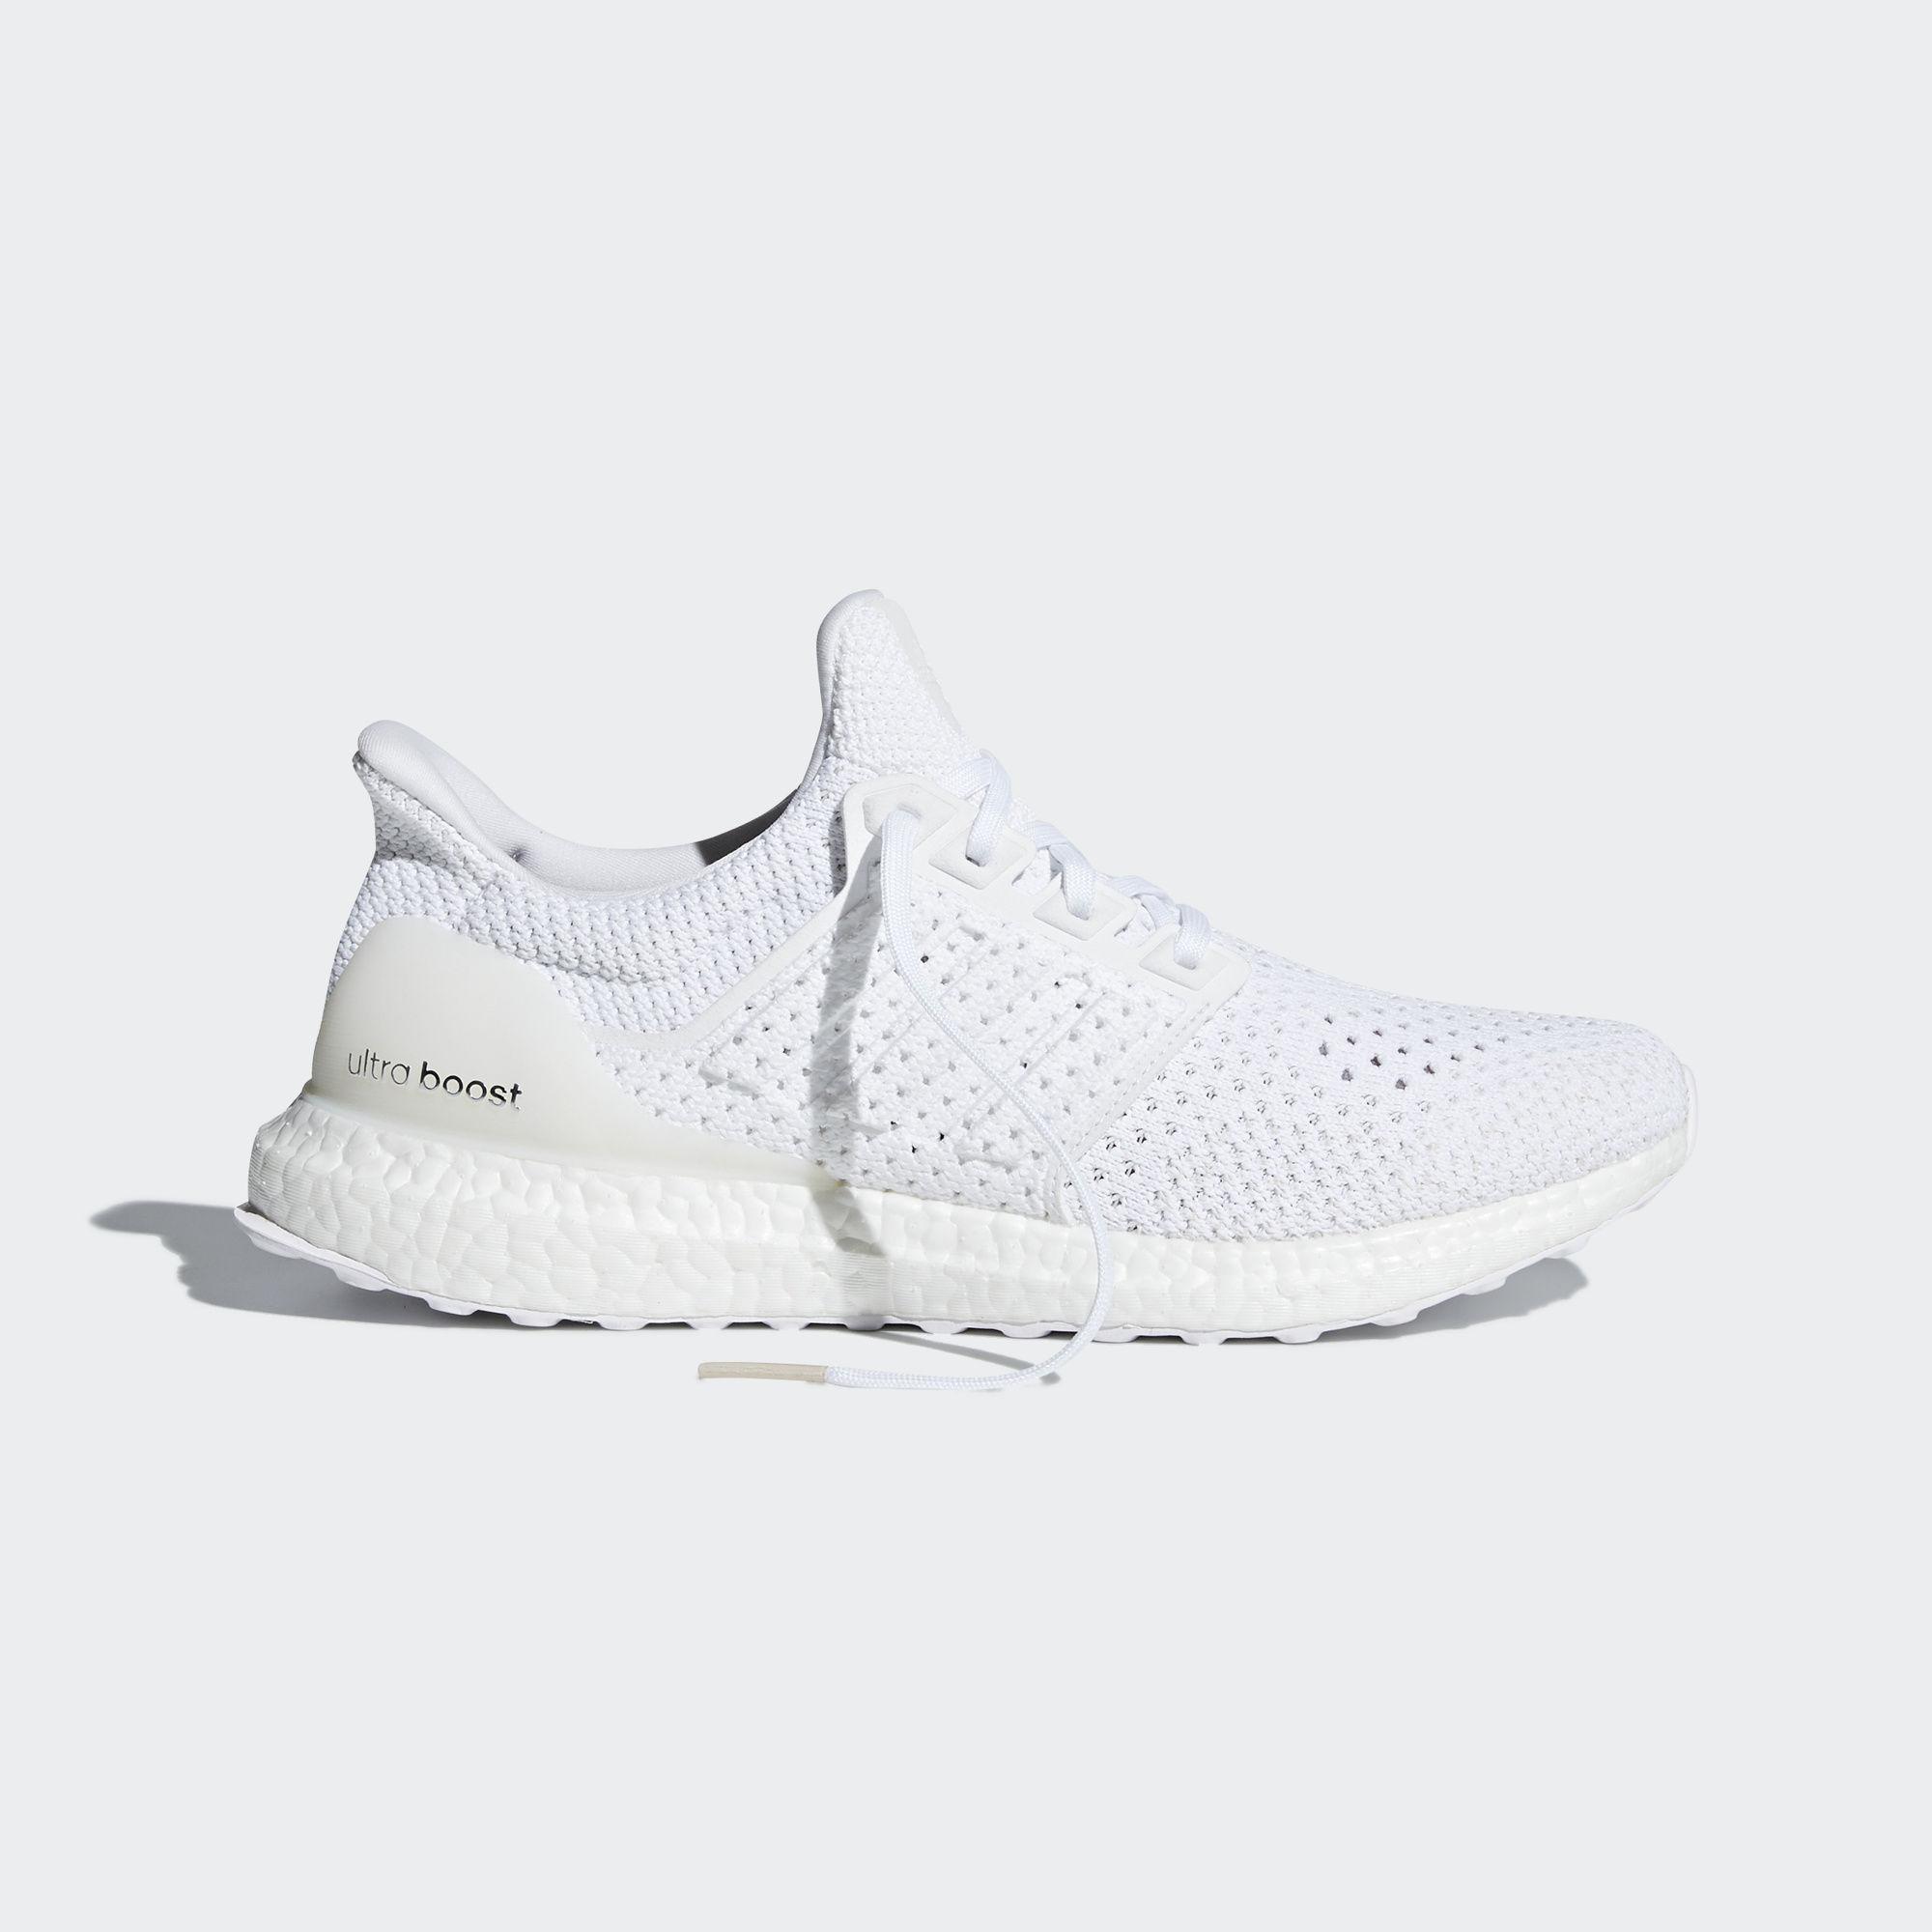 adidas men's ultra boost clima running shoes